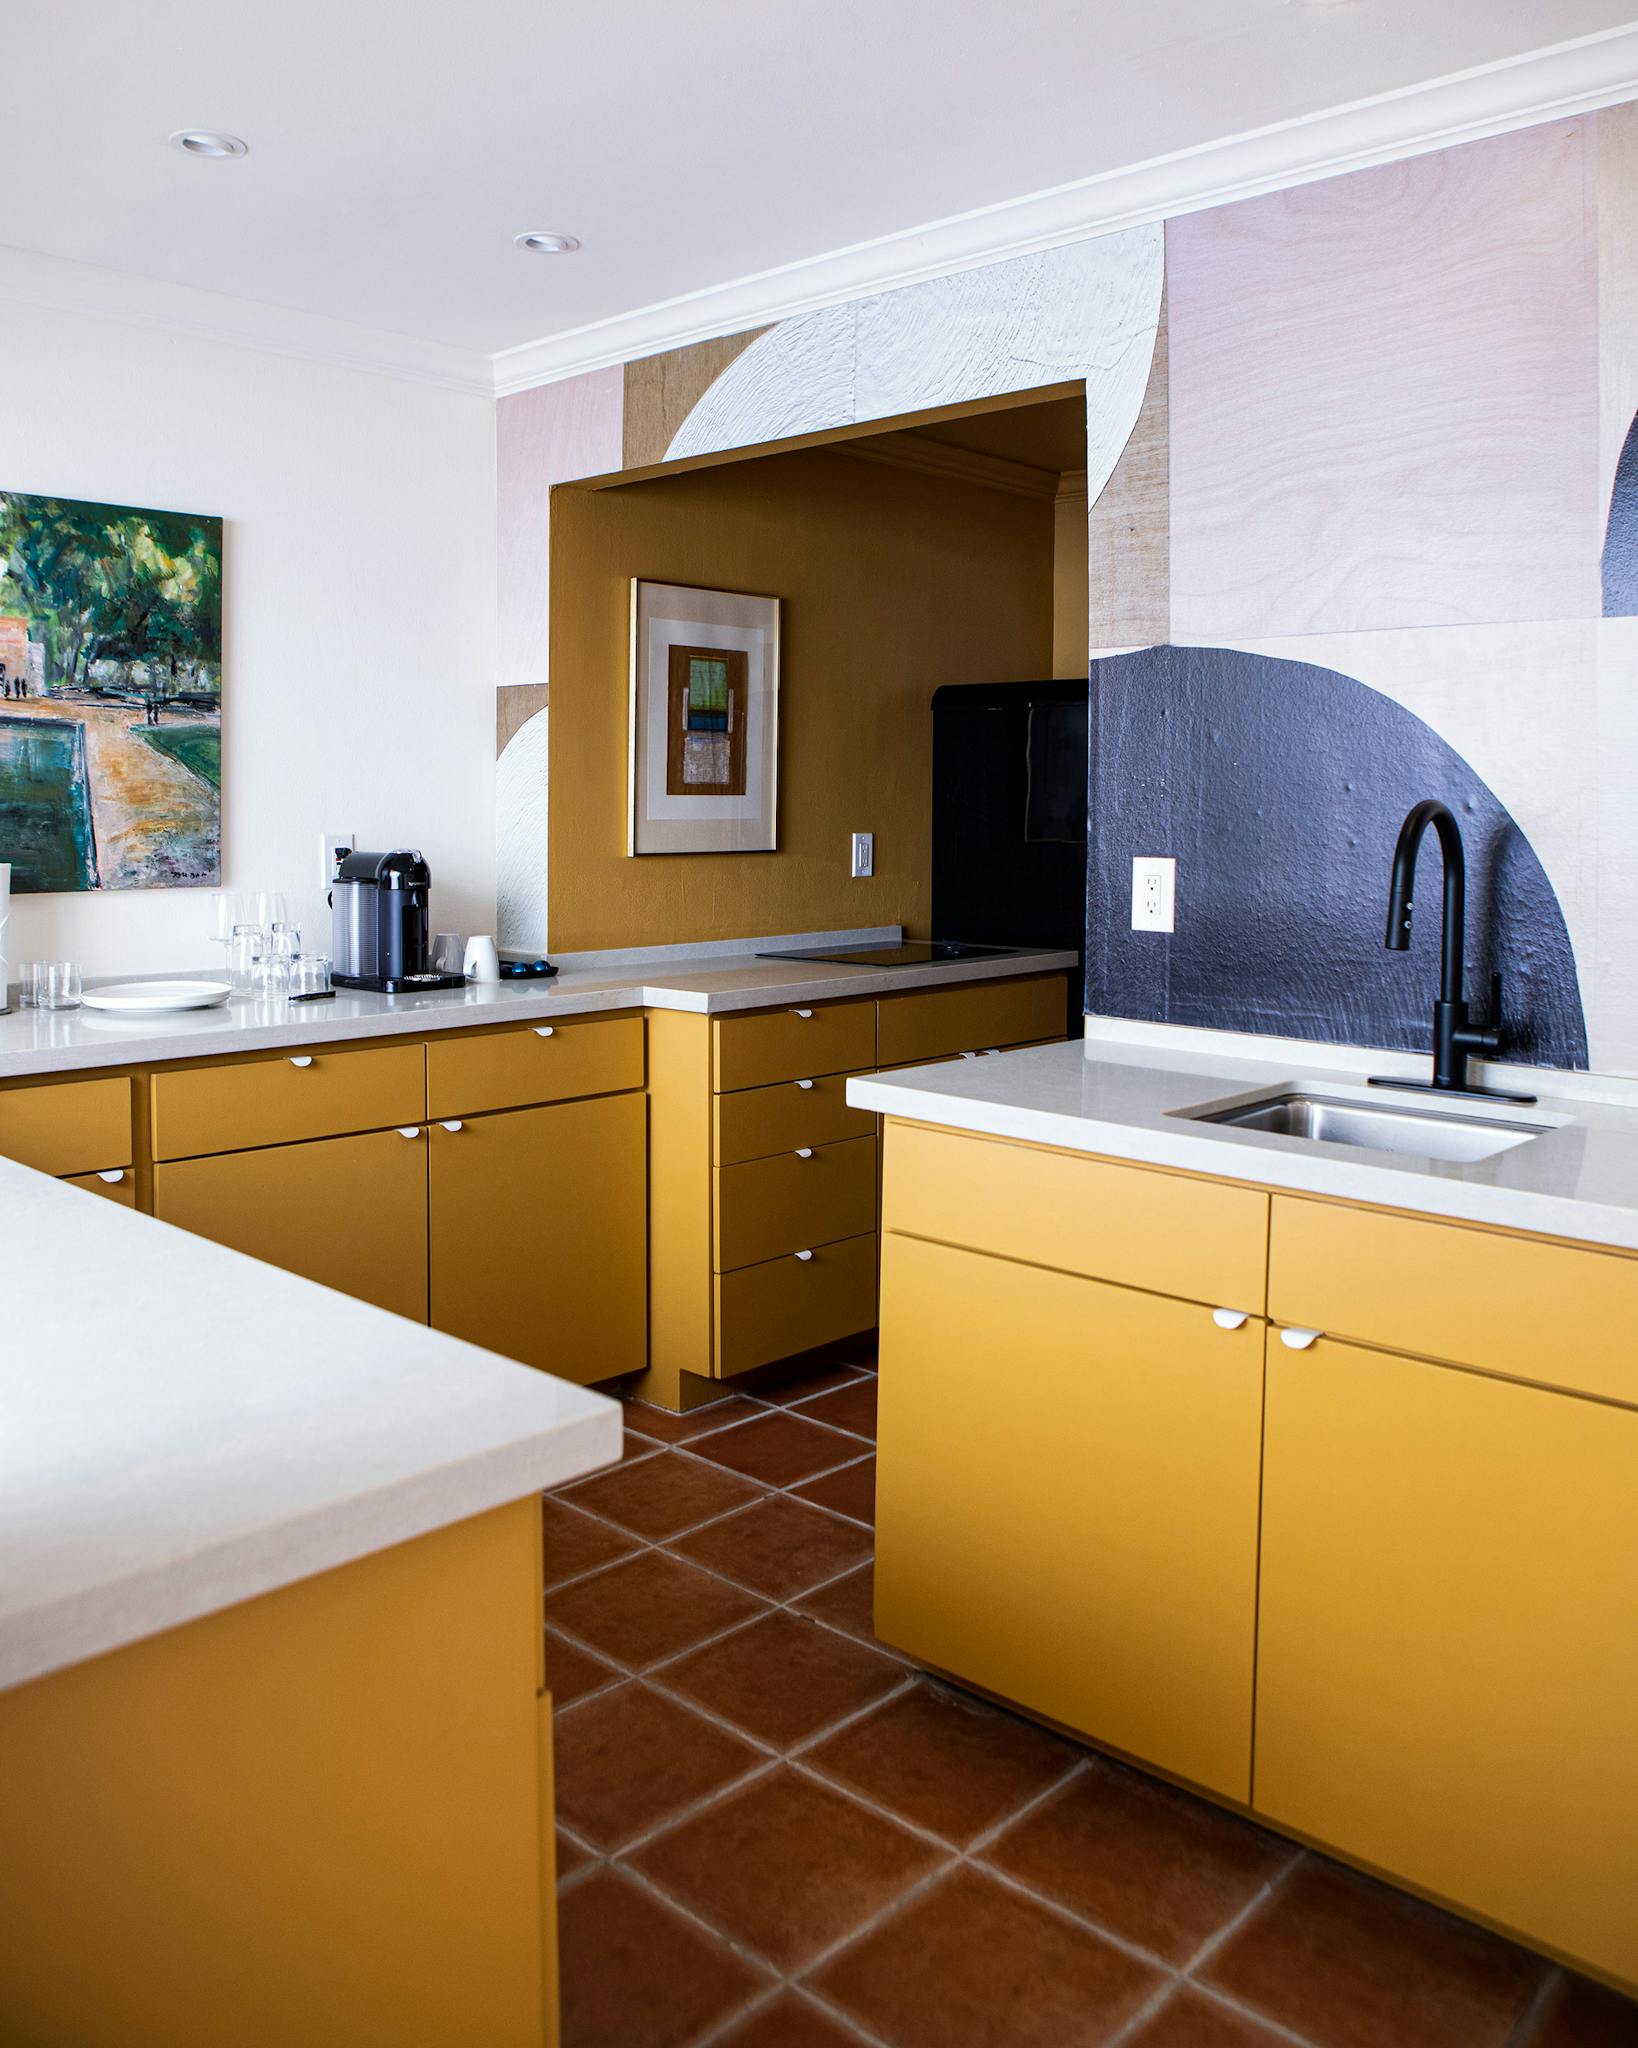 Though equipped with modern appliances, the retro kitchens have a midcentury modern vibe.